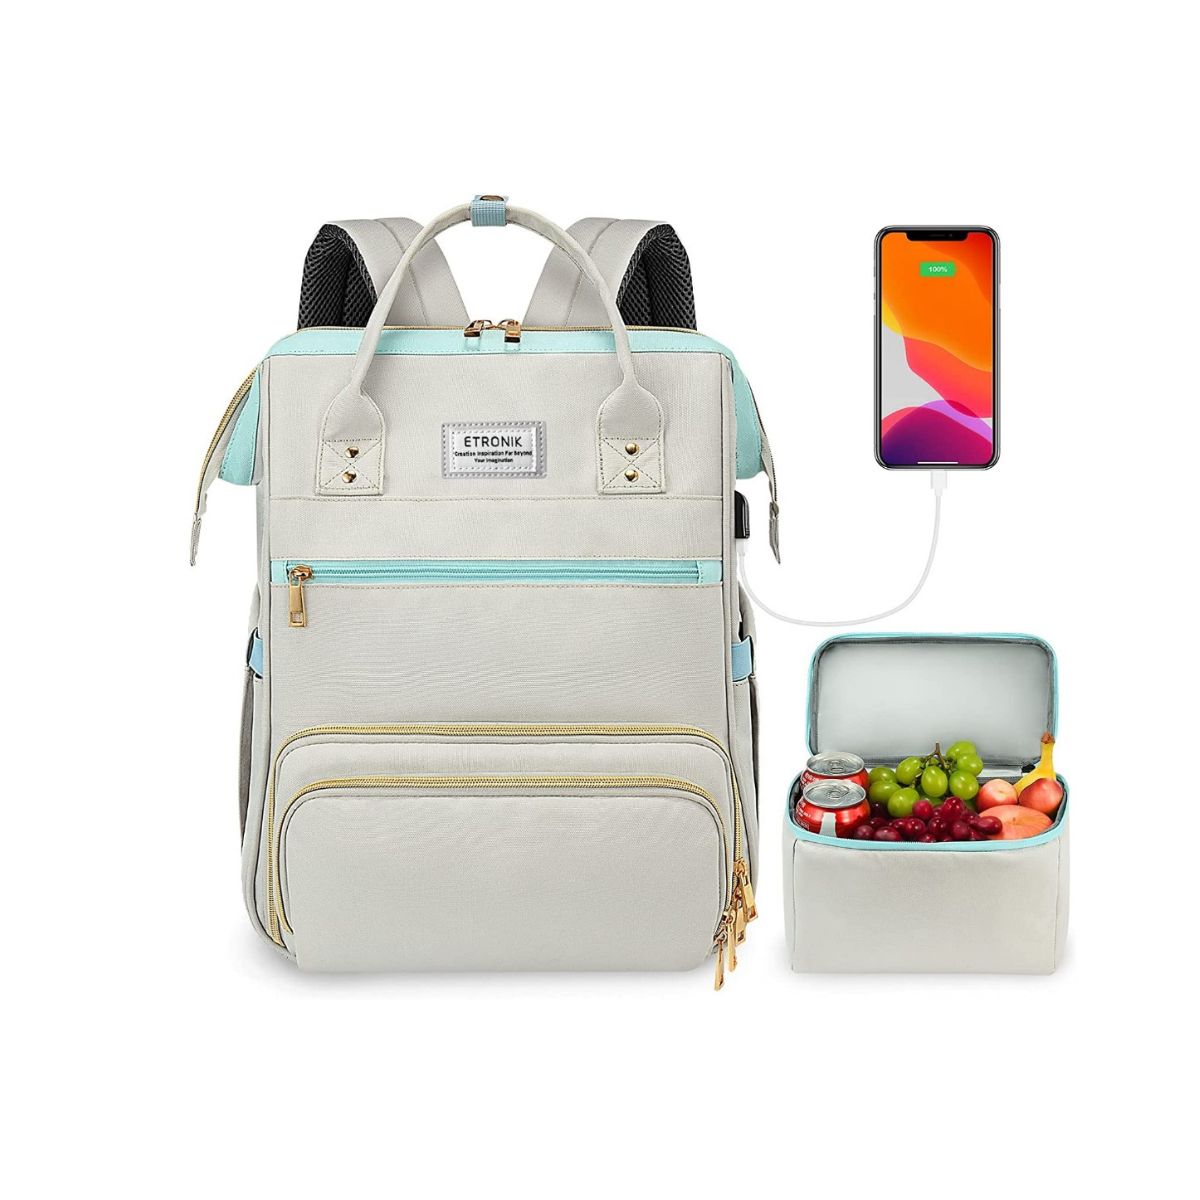 Super cute grey and turqoise backpack lunch box with USB port and gold zippers